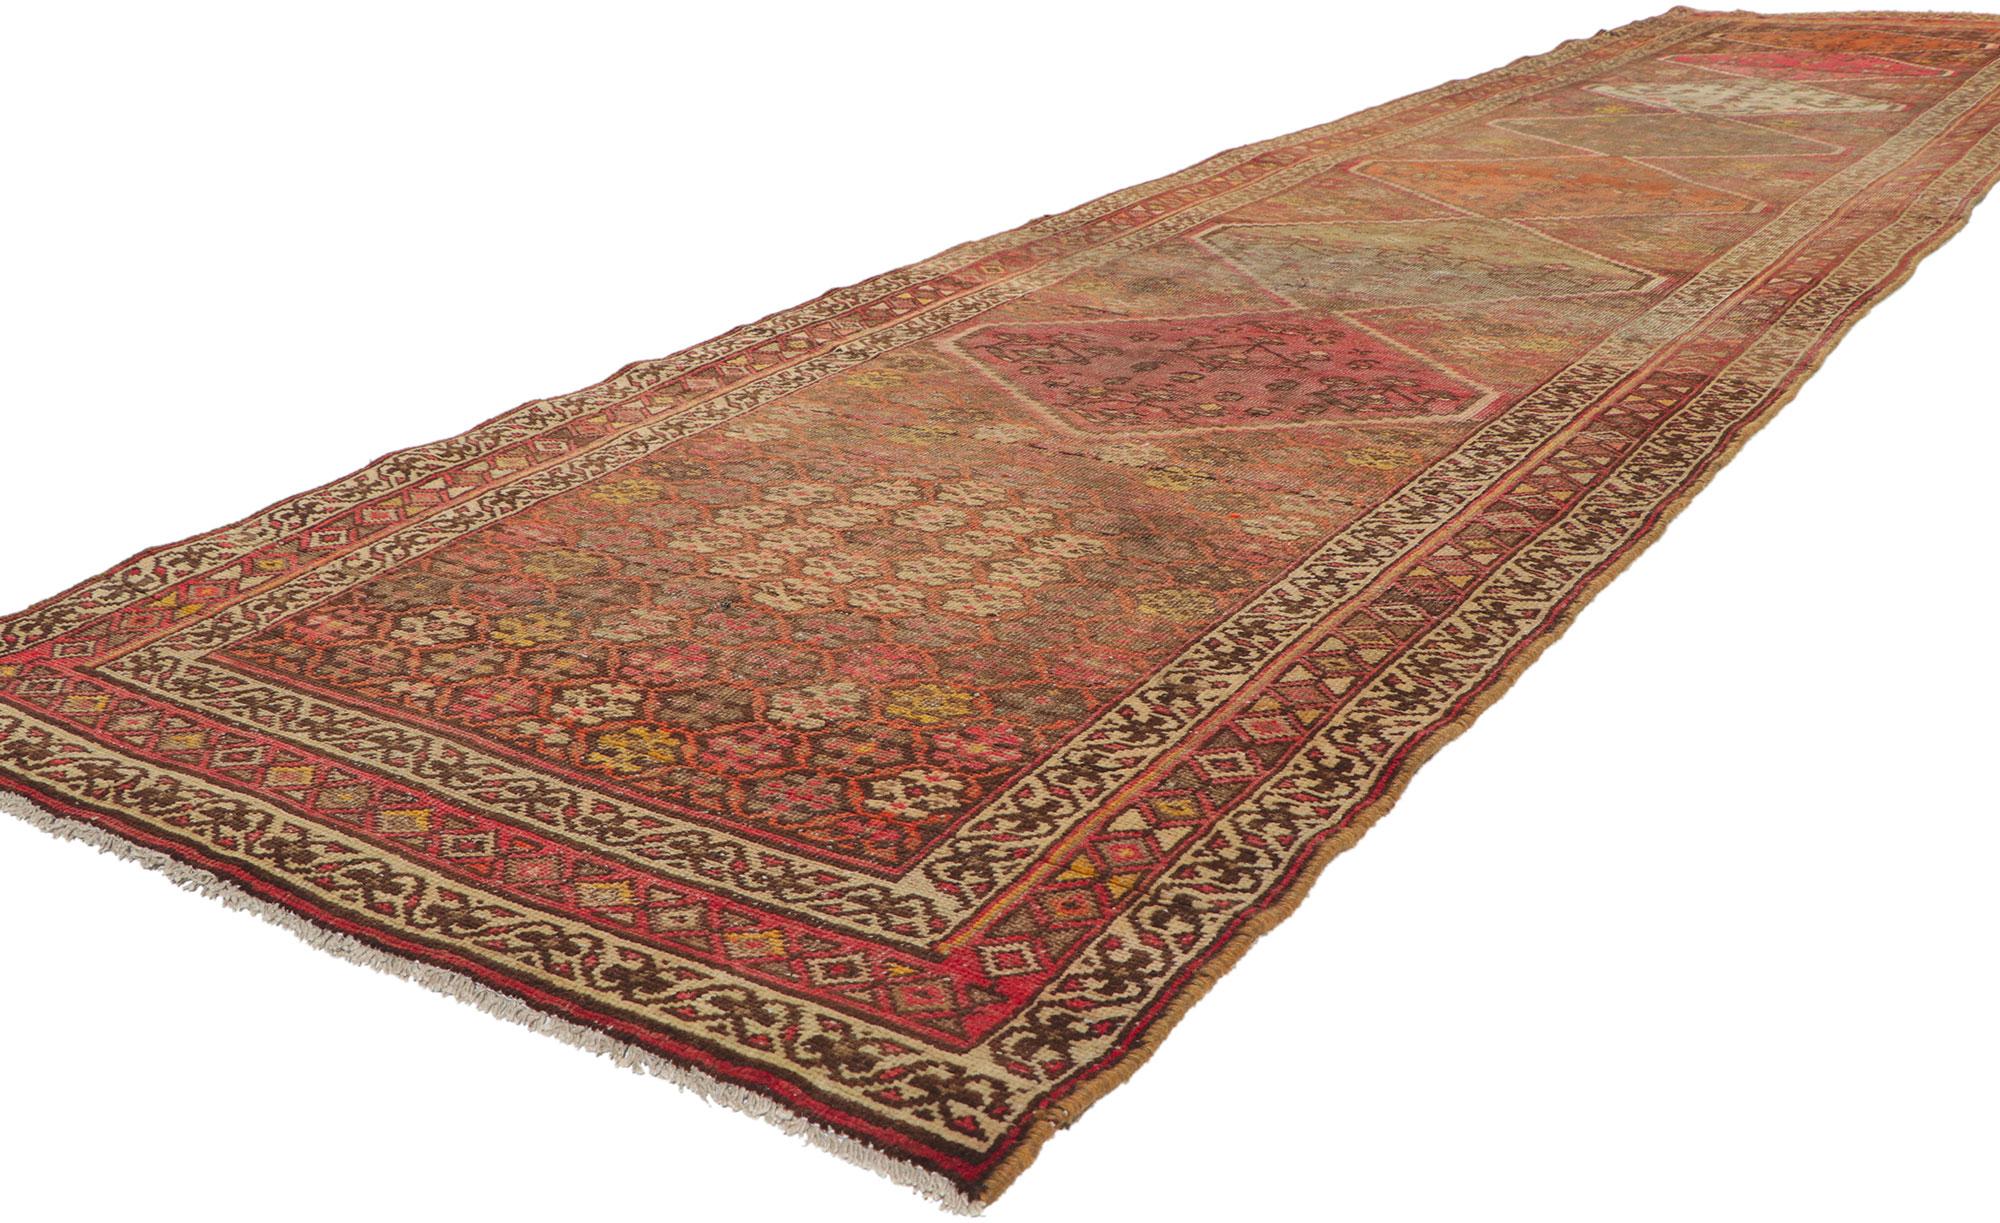 61067 Distressed antique Persian Malayer runner with Tribal style. Measures: 03'08 x 15'06.